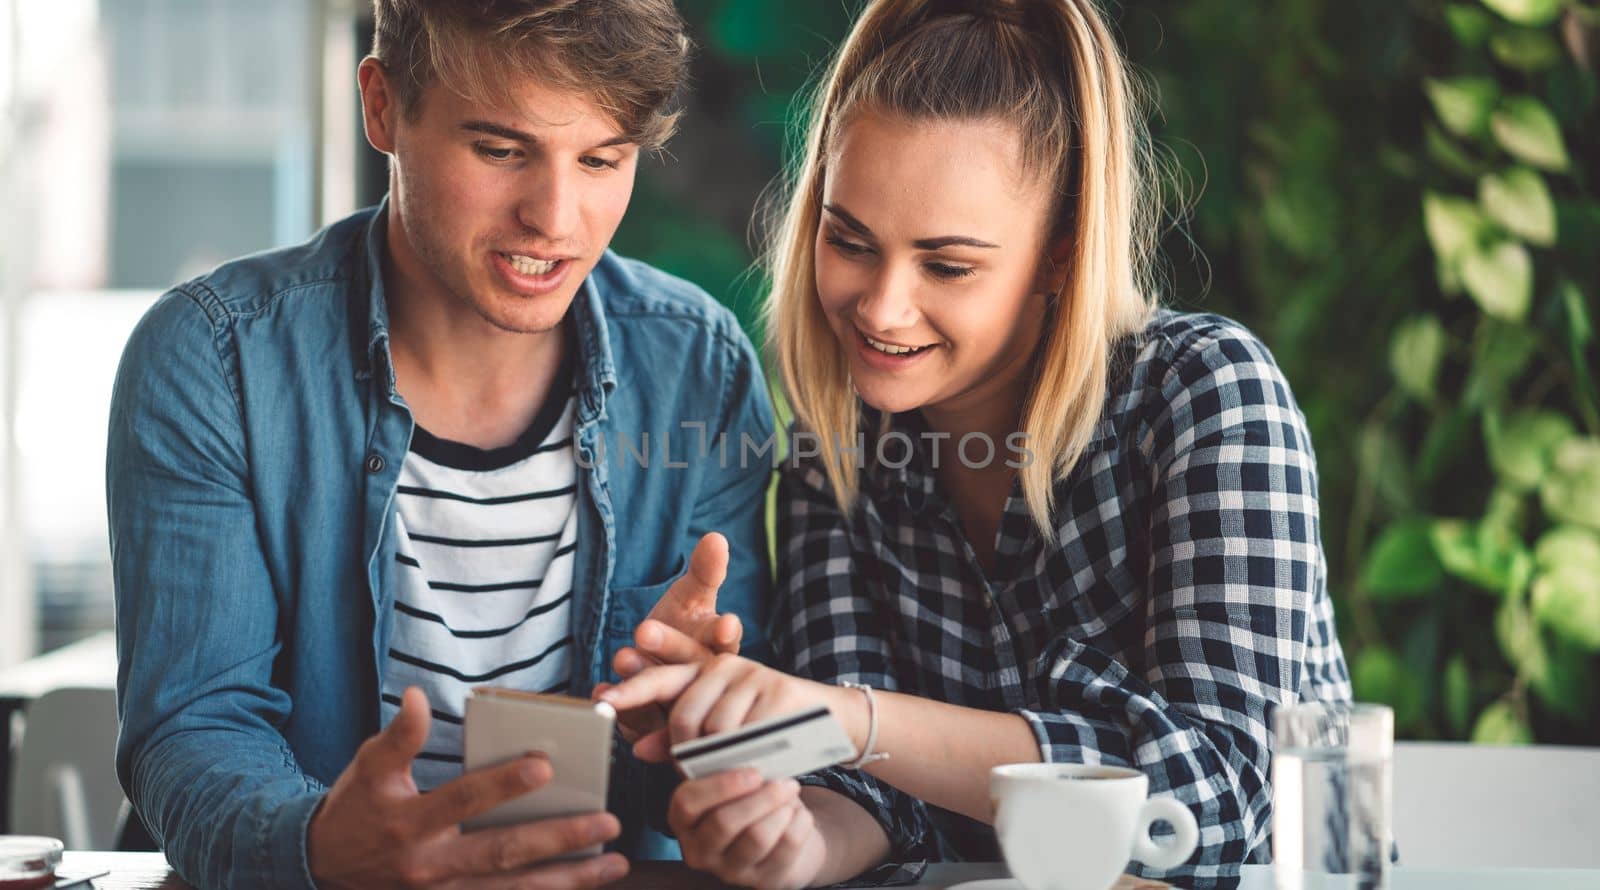 Young caucasian couple of students sitting at a cafe online shopping on their laptop. Both smiling while looking at the laptop.